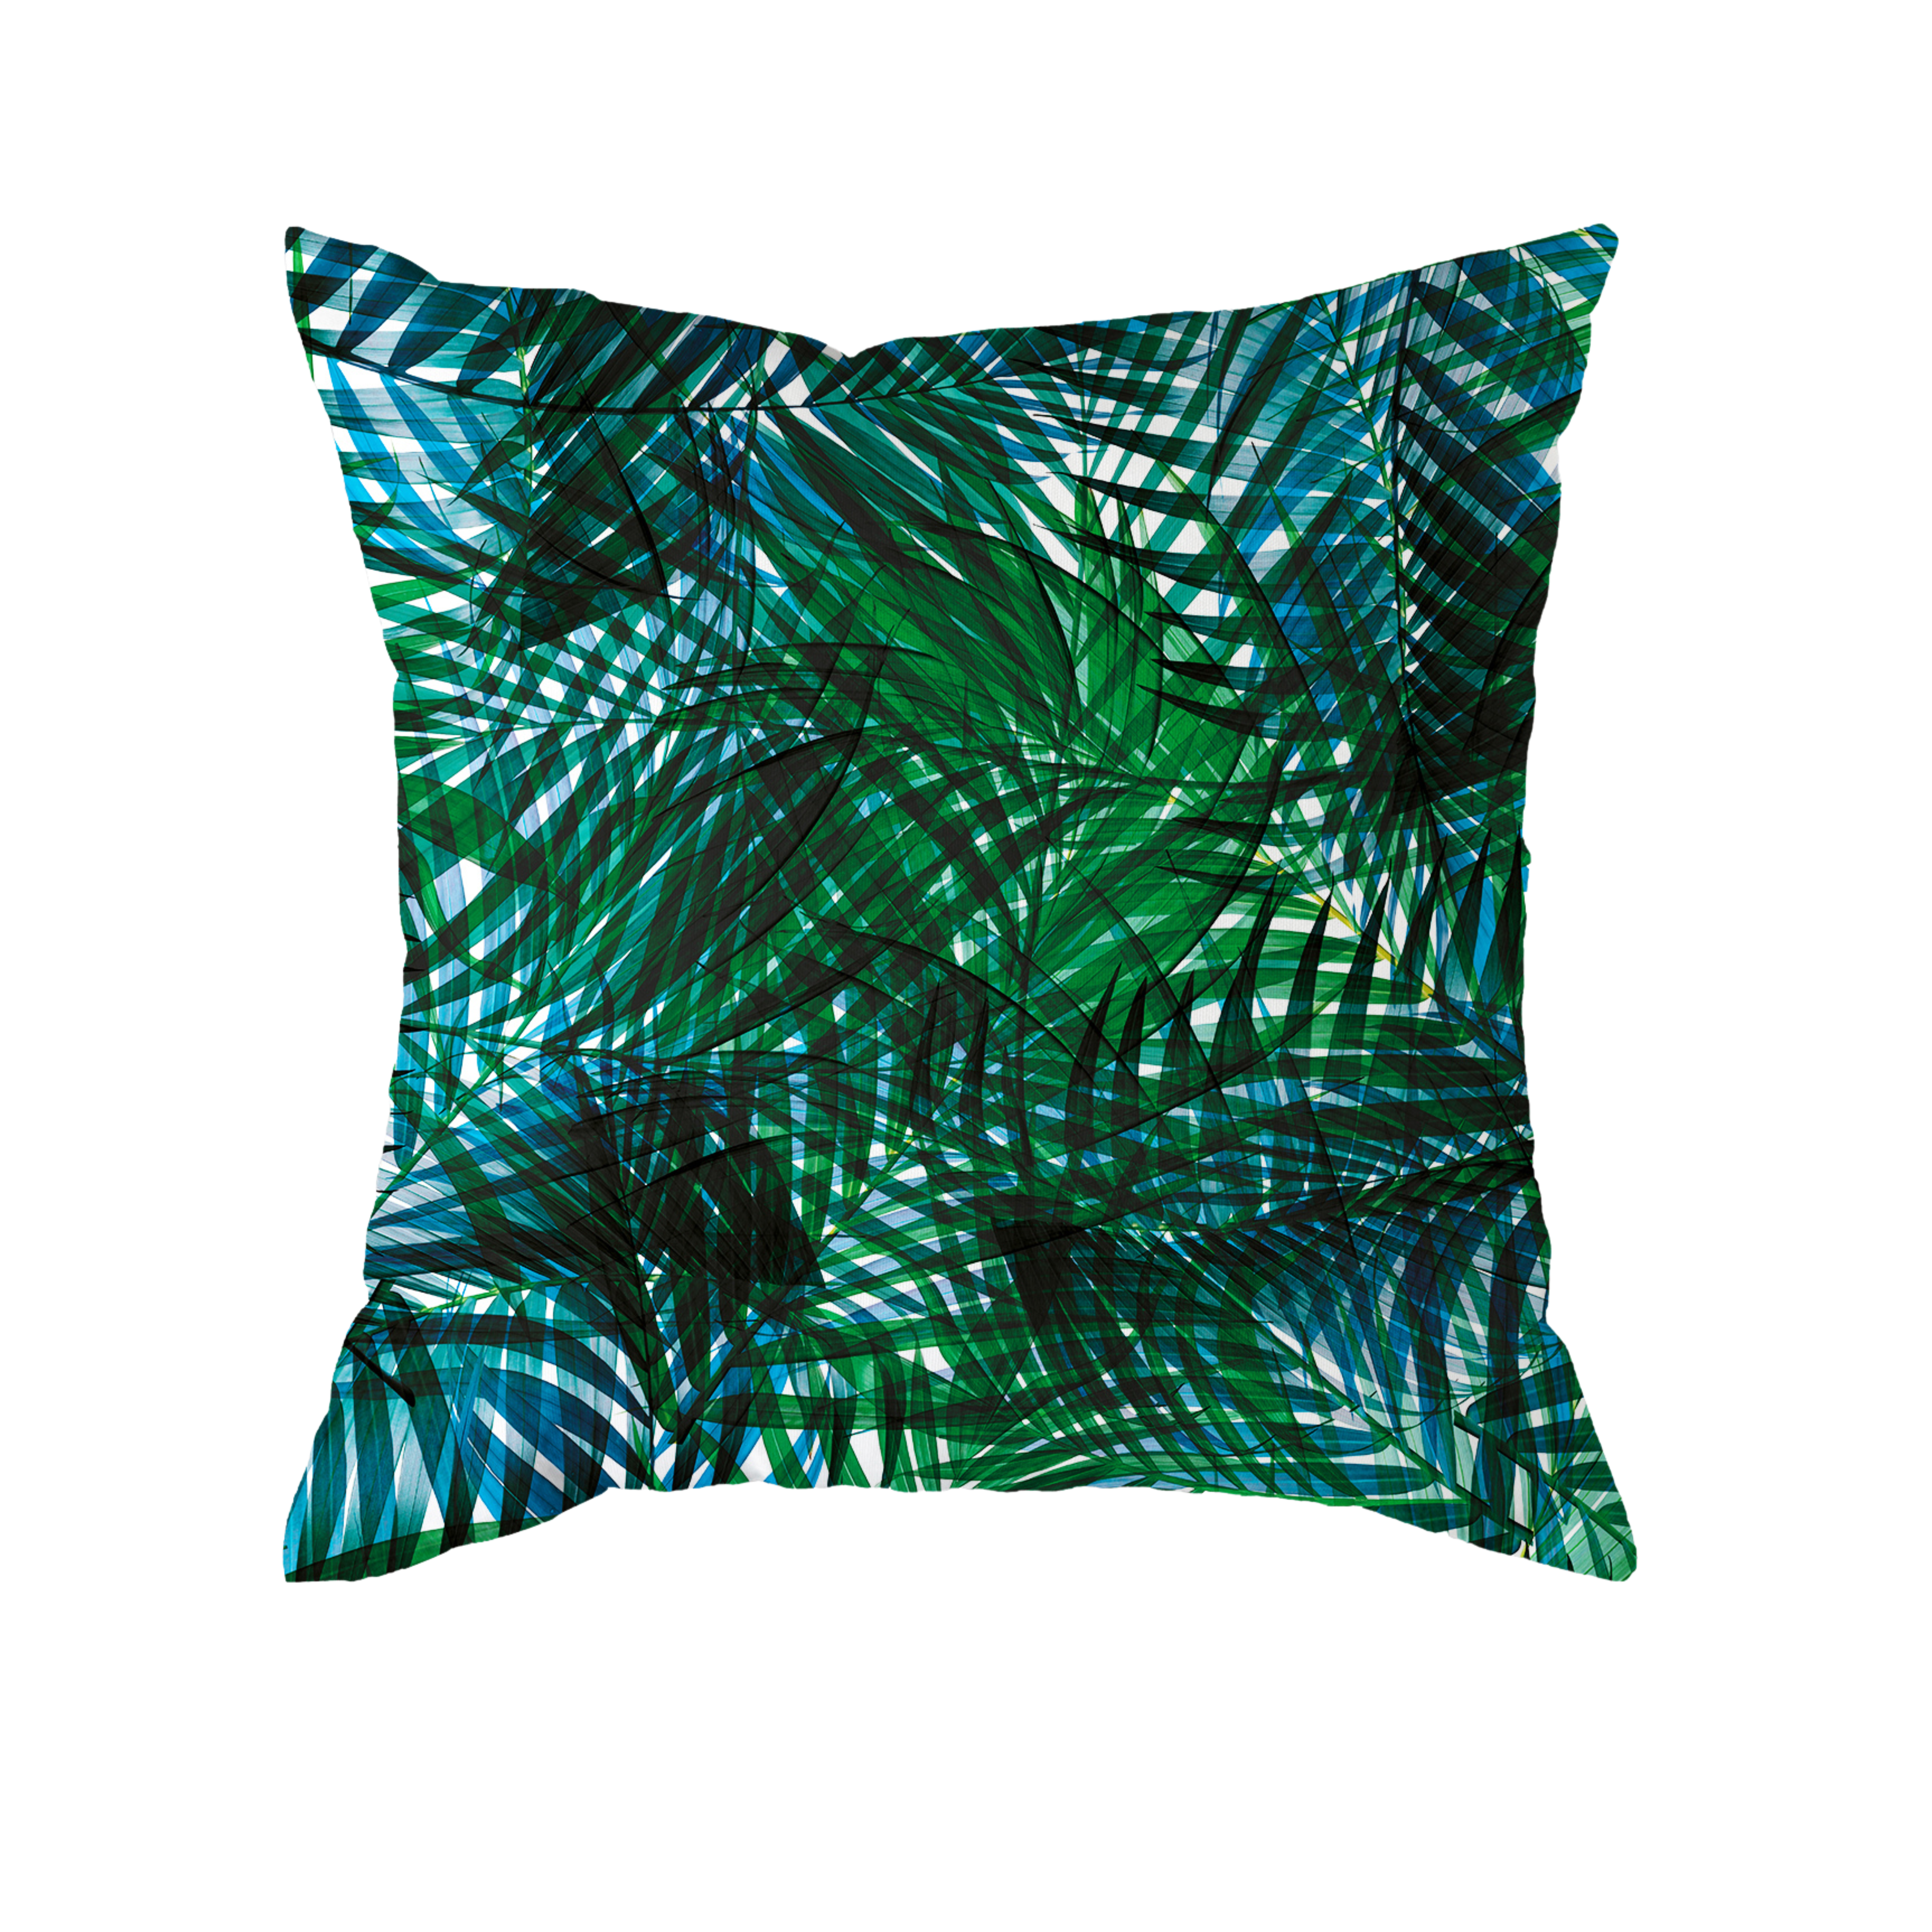 Haddow Cushions with Pattern